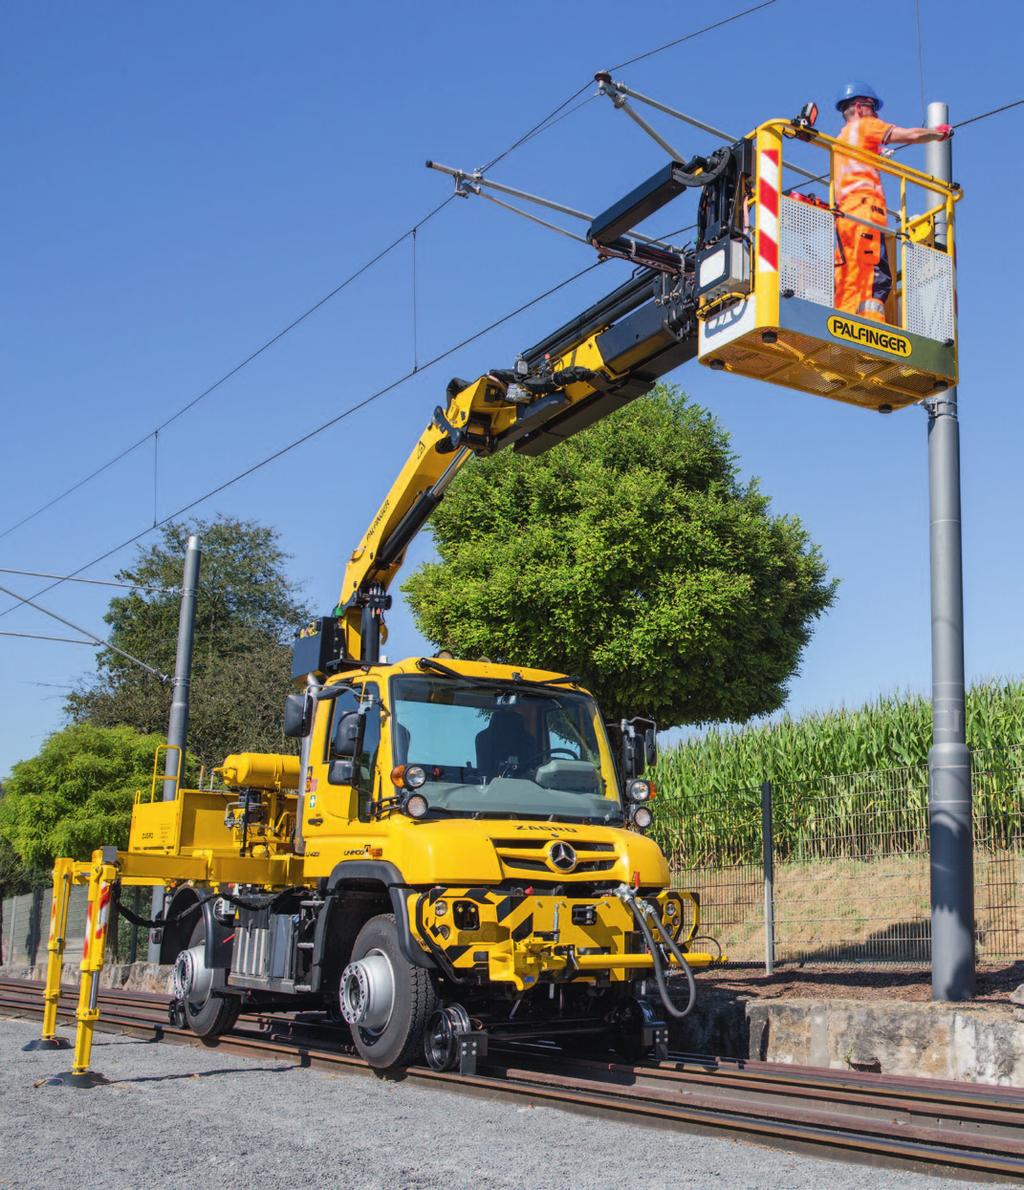 When fitted with corresponding equipment, with the aid of the hydrostatic drive the Unimog can also be controlled precisely from the work platform on inspection runs or when carrying out maintenance